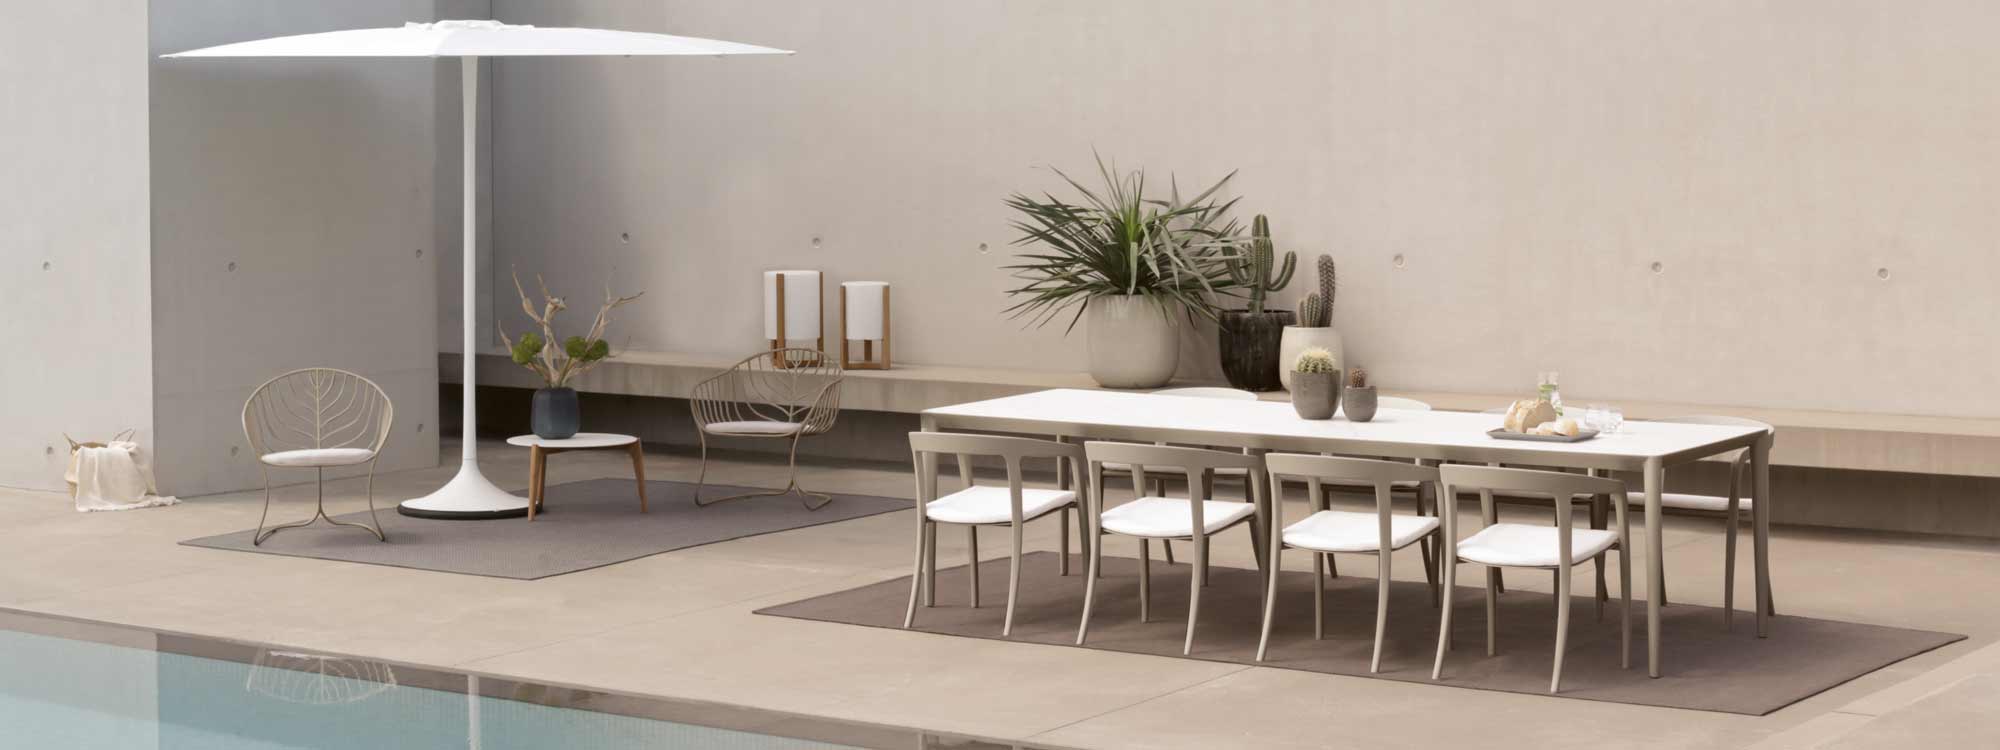 Image of sand-colored Jive chairs and U-nite garden table by Royal Botania.